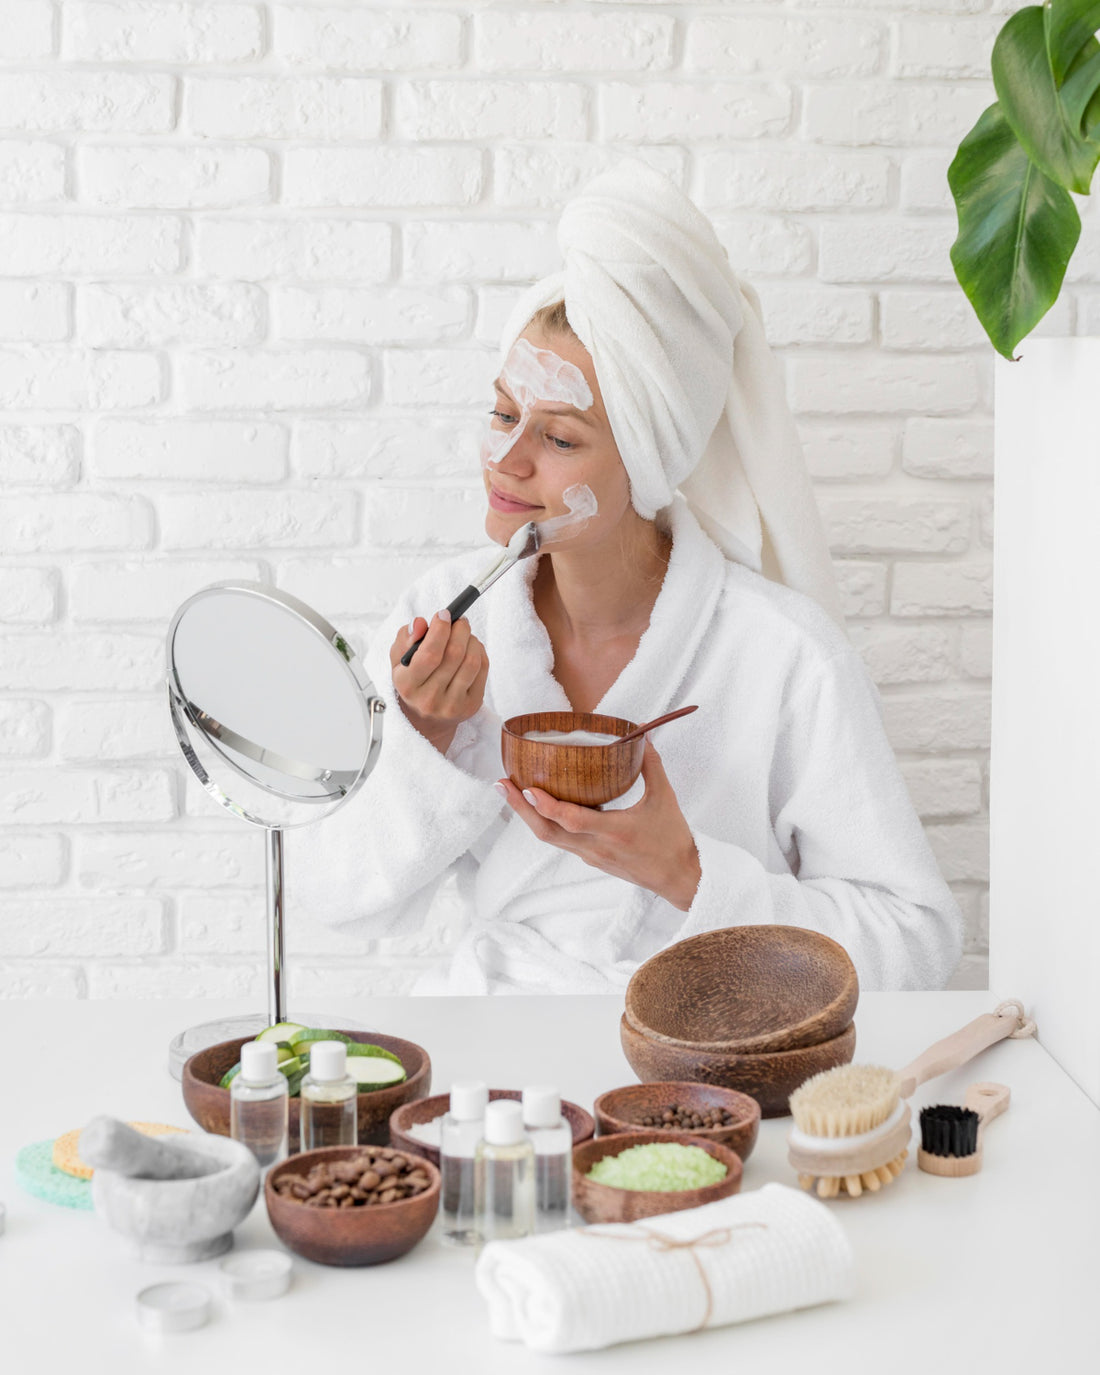 How to Make Homemade Skincare Products